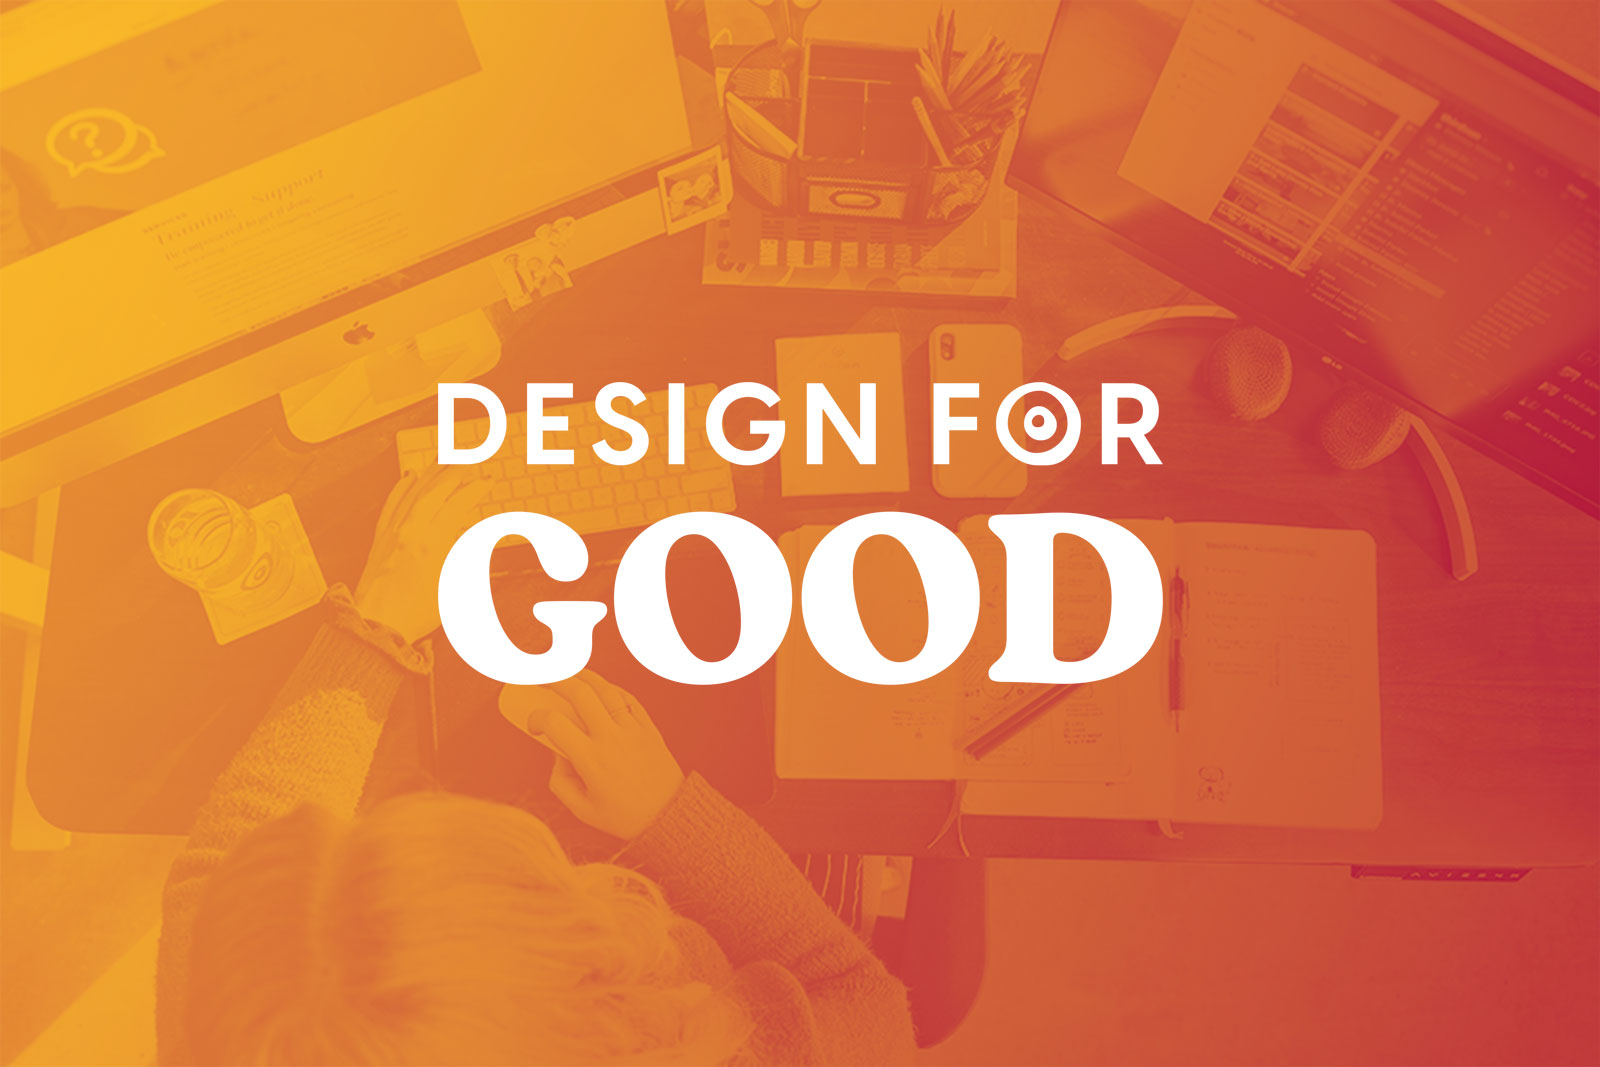 Design for Good 2022 — Now Accepting Applications!